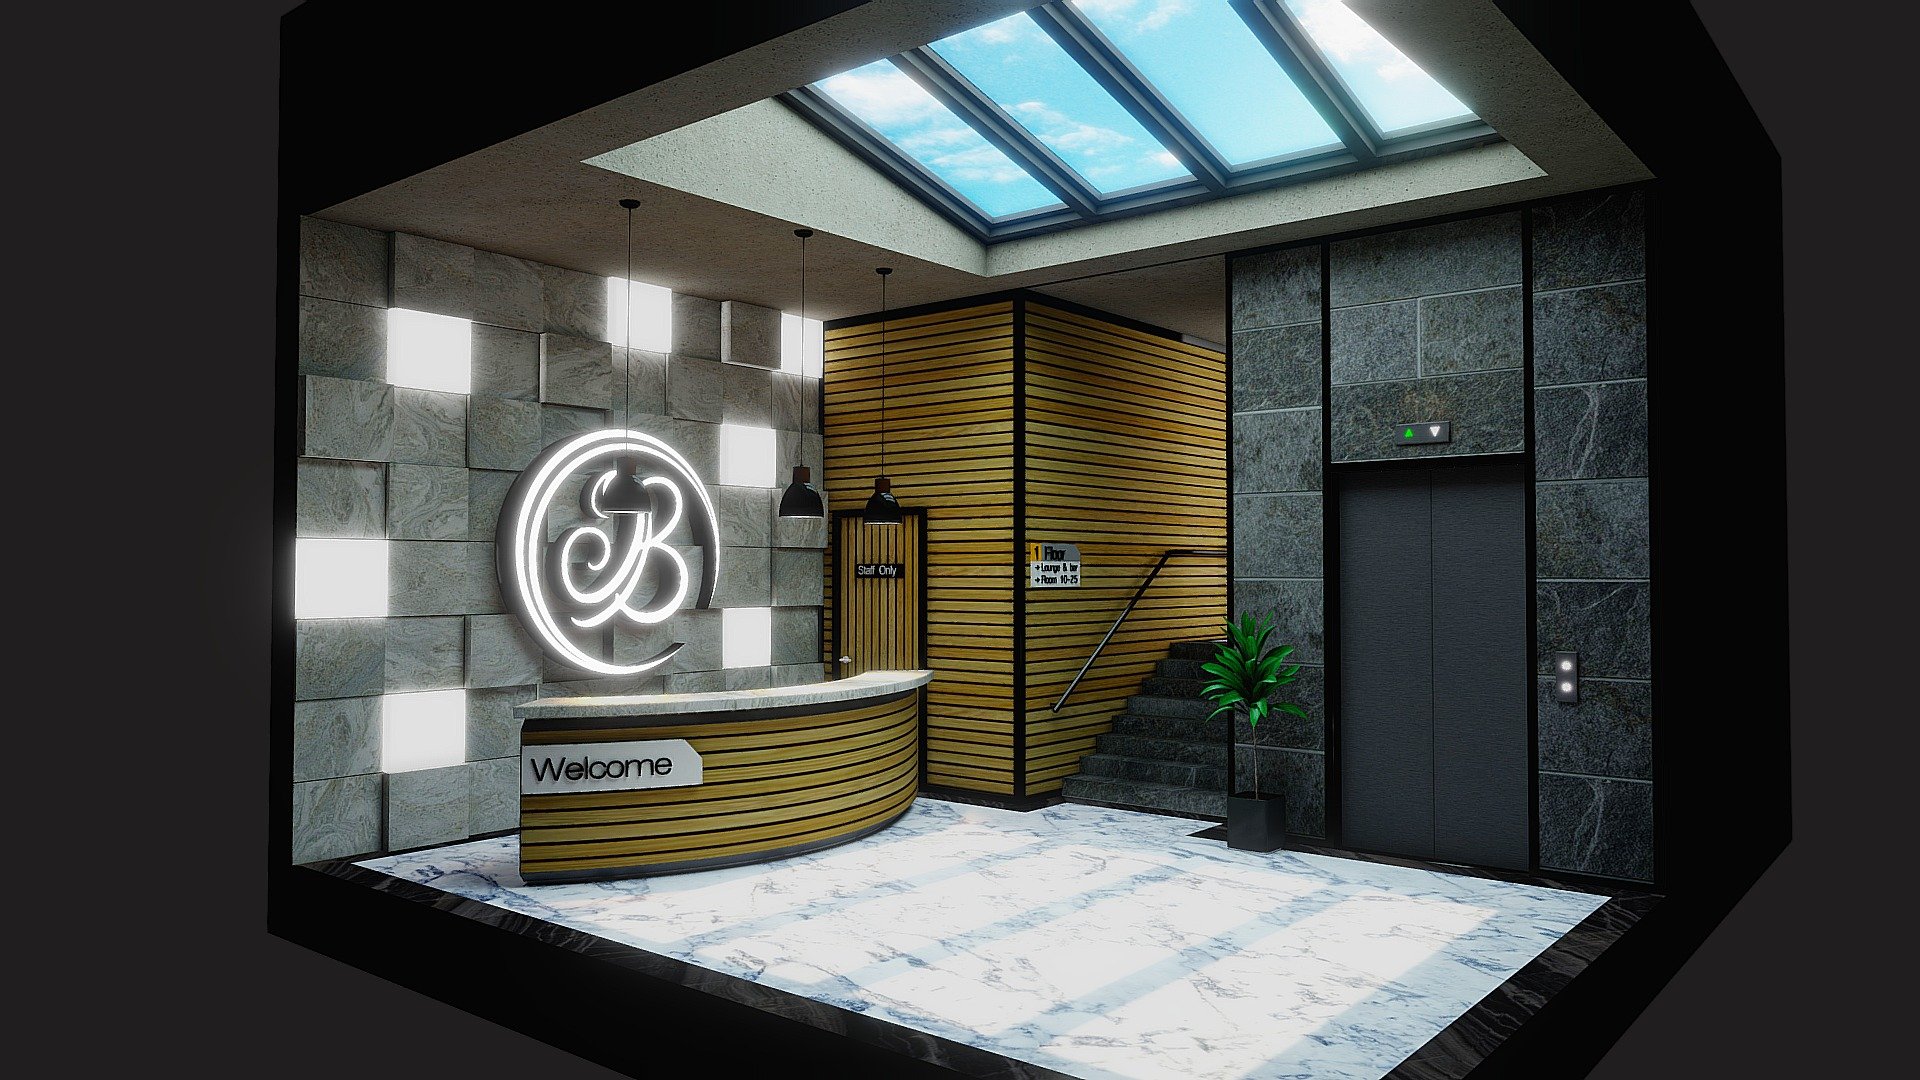 B _ hotel reception with  lights and textures baking - blender 3.3.5

4096k hotel diffuse texture + sky diffuse.

DAE file + Blender .Blend additional file for multiple export​ 3d model